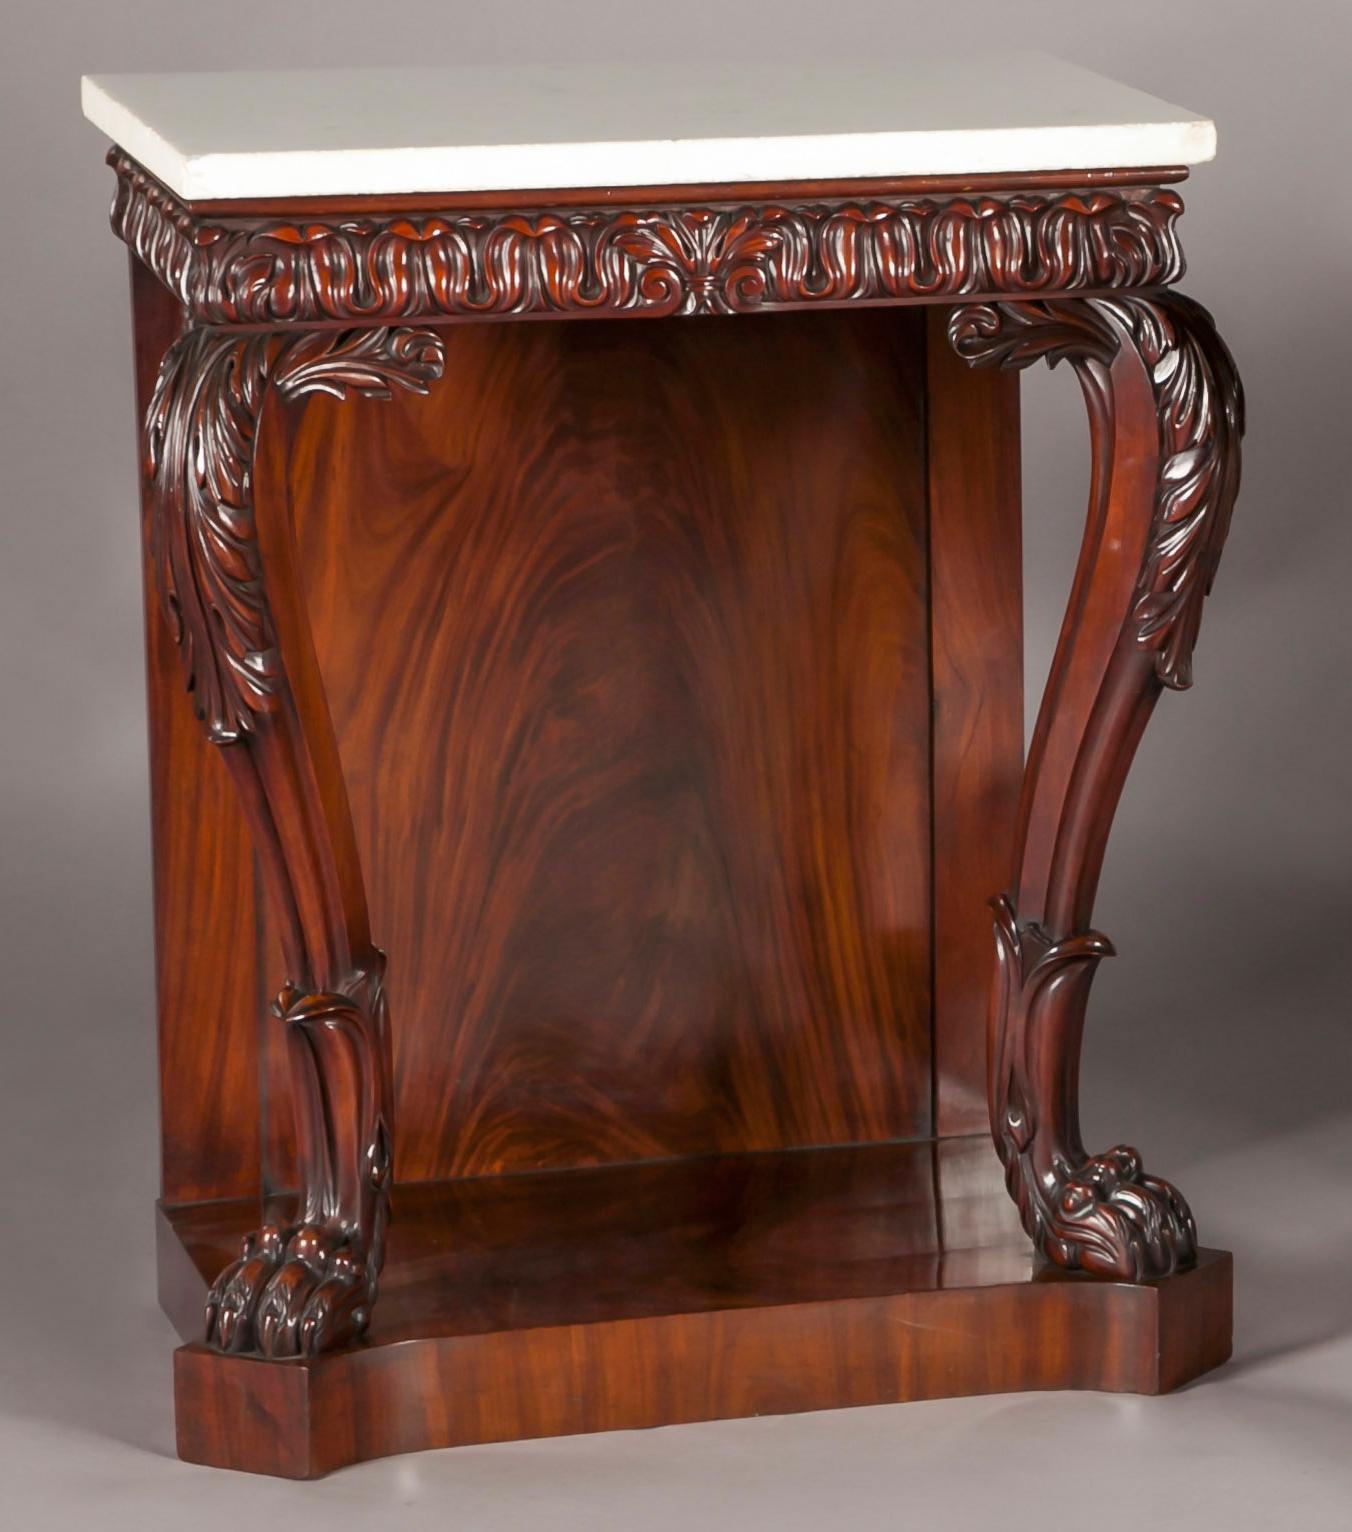 A pair of Irish Regency mahogany console tables, the rectangular Carrara marble tops, above a lotus leaf carved frieze, resting on bold Acanthus carved cabriole legs, with lions paw feet, resting on a plate-form base.
Probably by Mack, Williams and